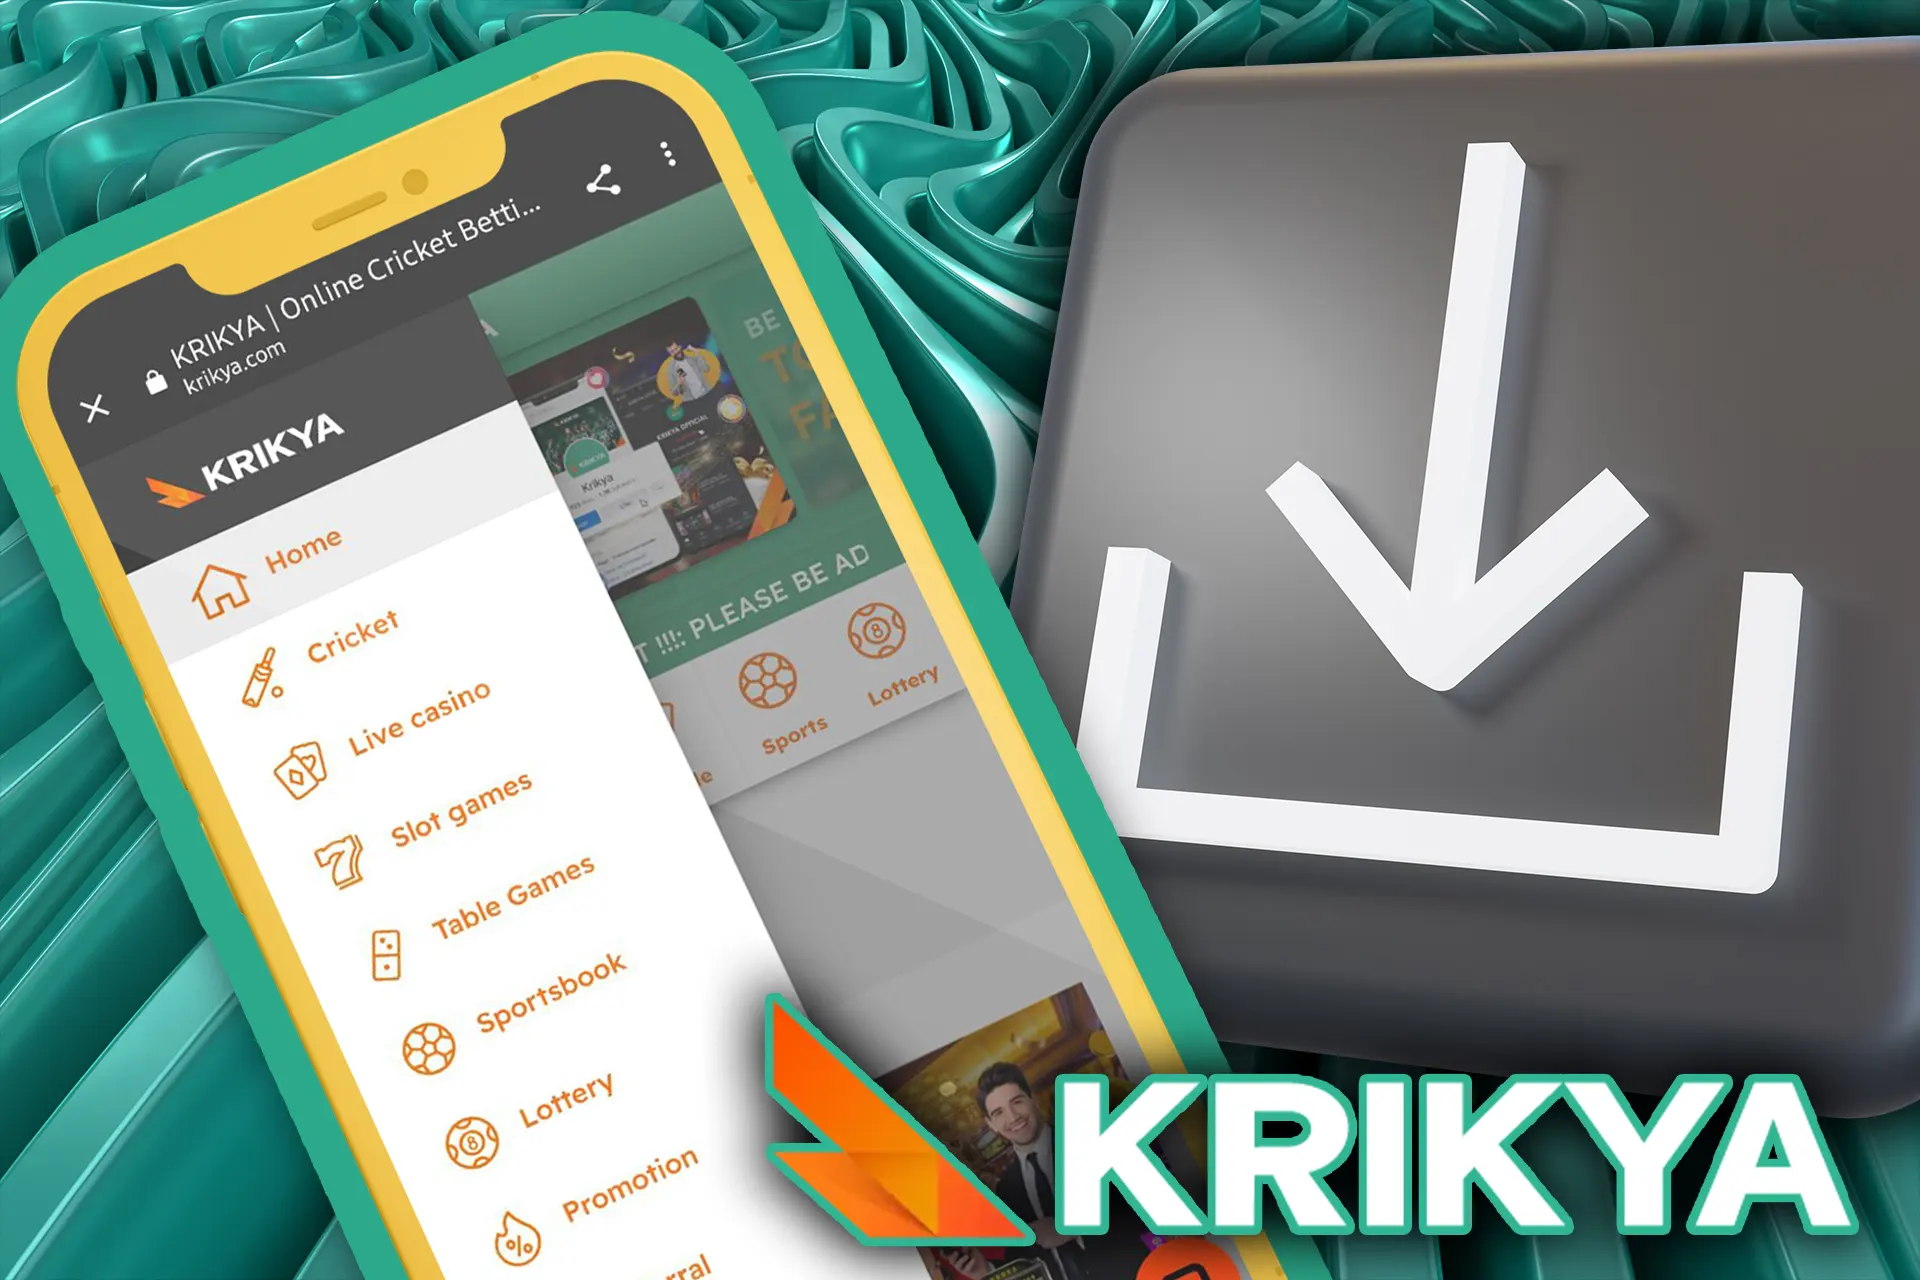 Download and install the Krikya app to bet whenever you want.